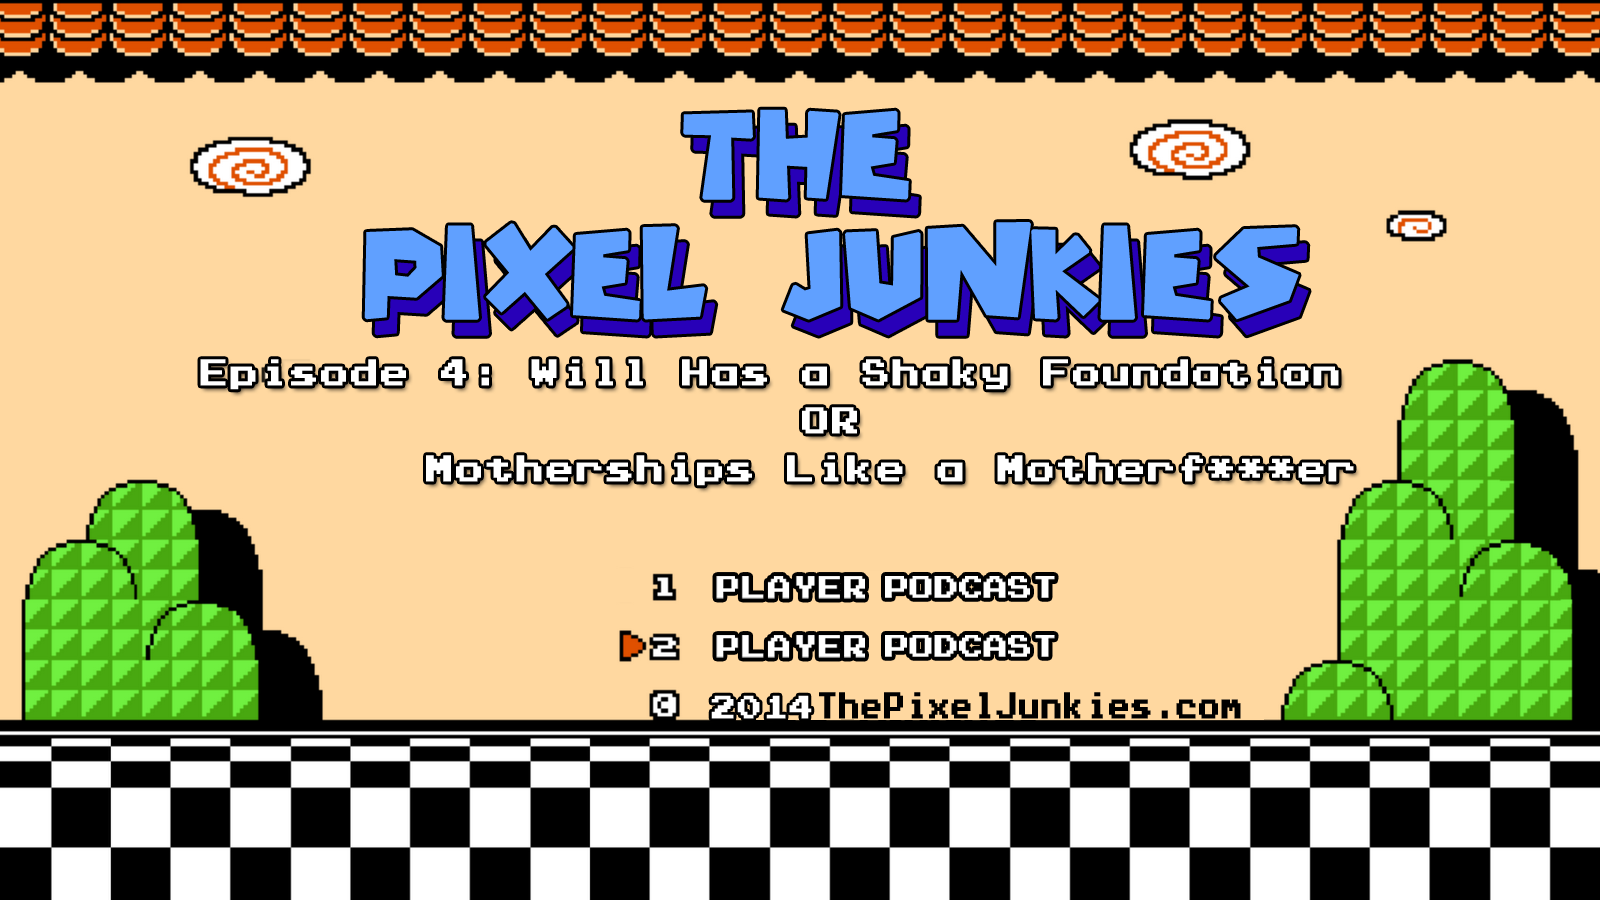 The Pixel Junkies Episode 4: Will Has a Shaky Foundation OR Motherships Like a Motherf***er